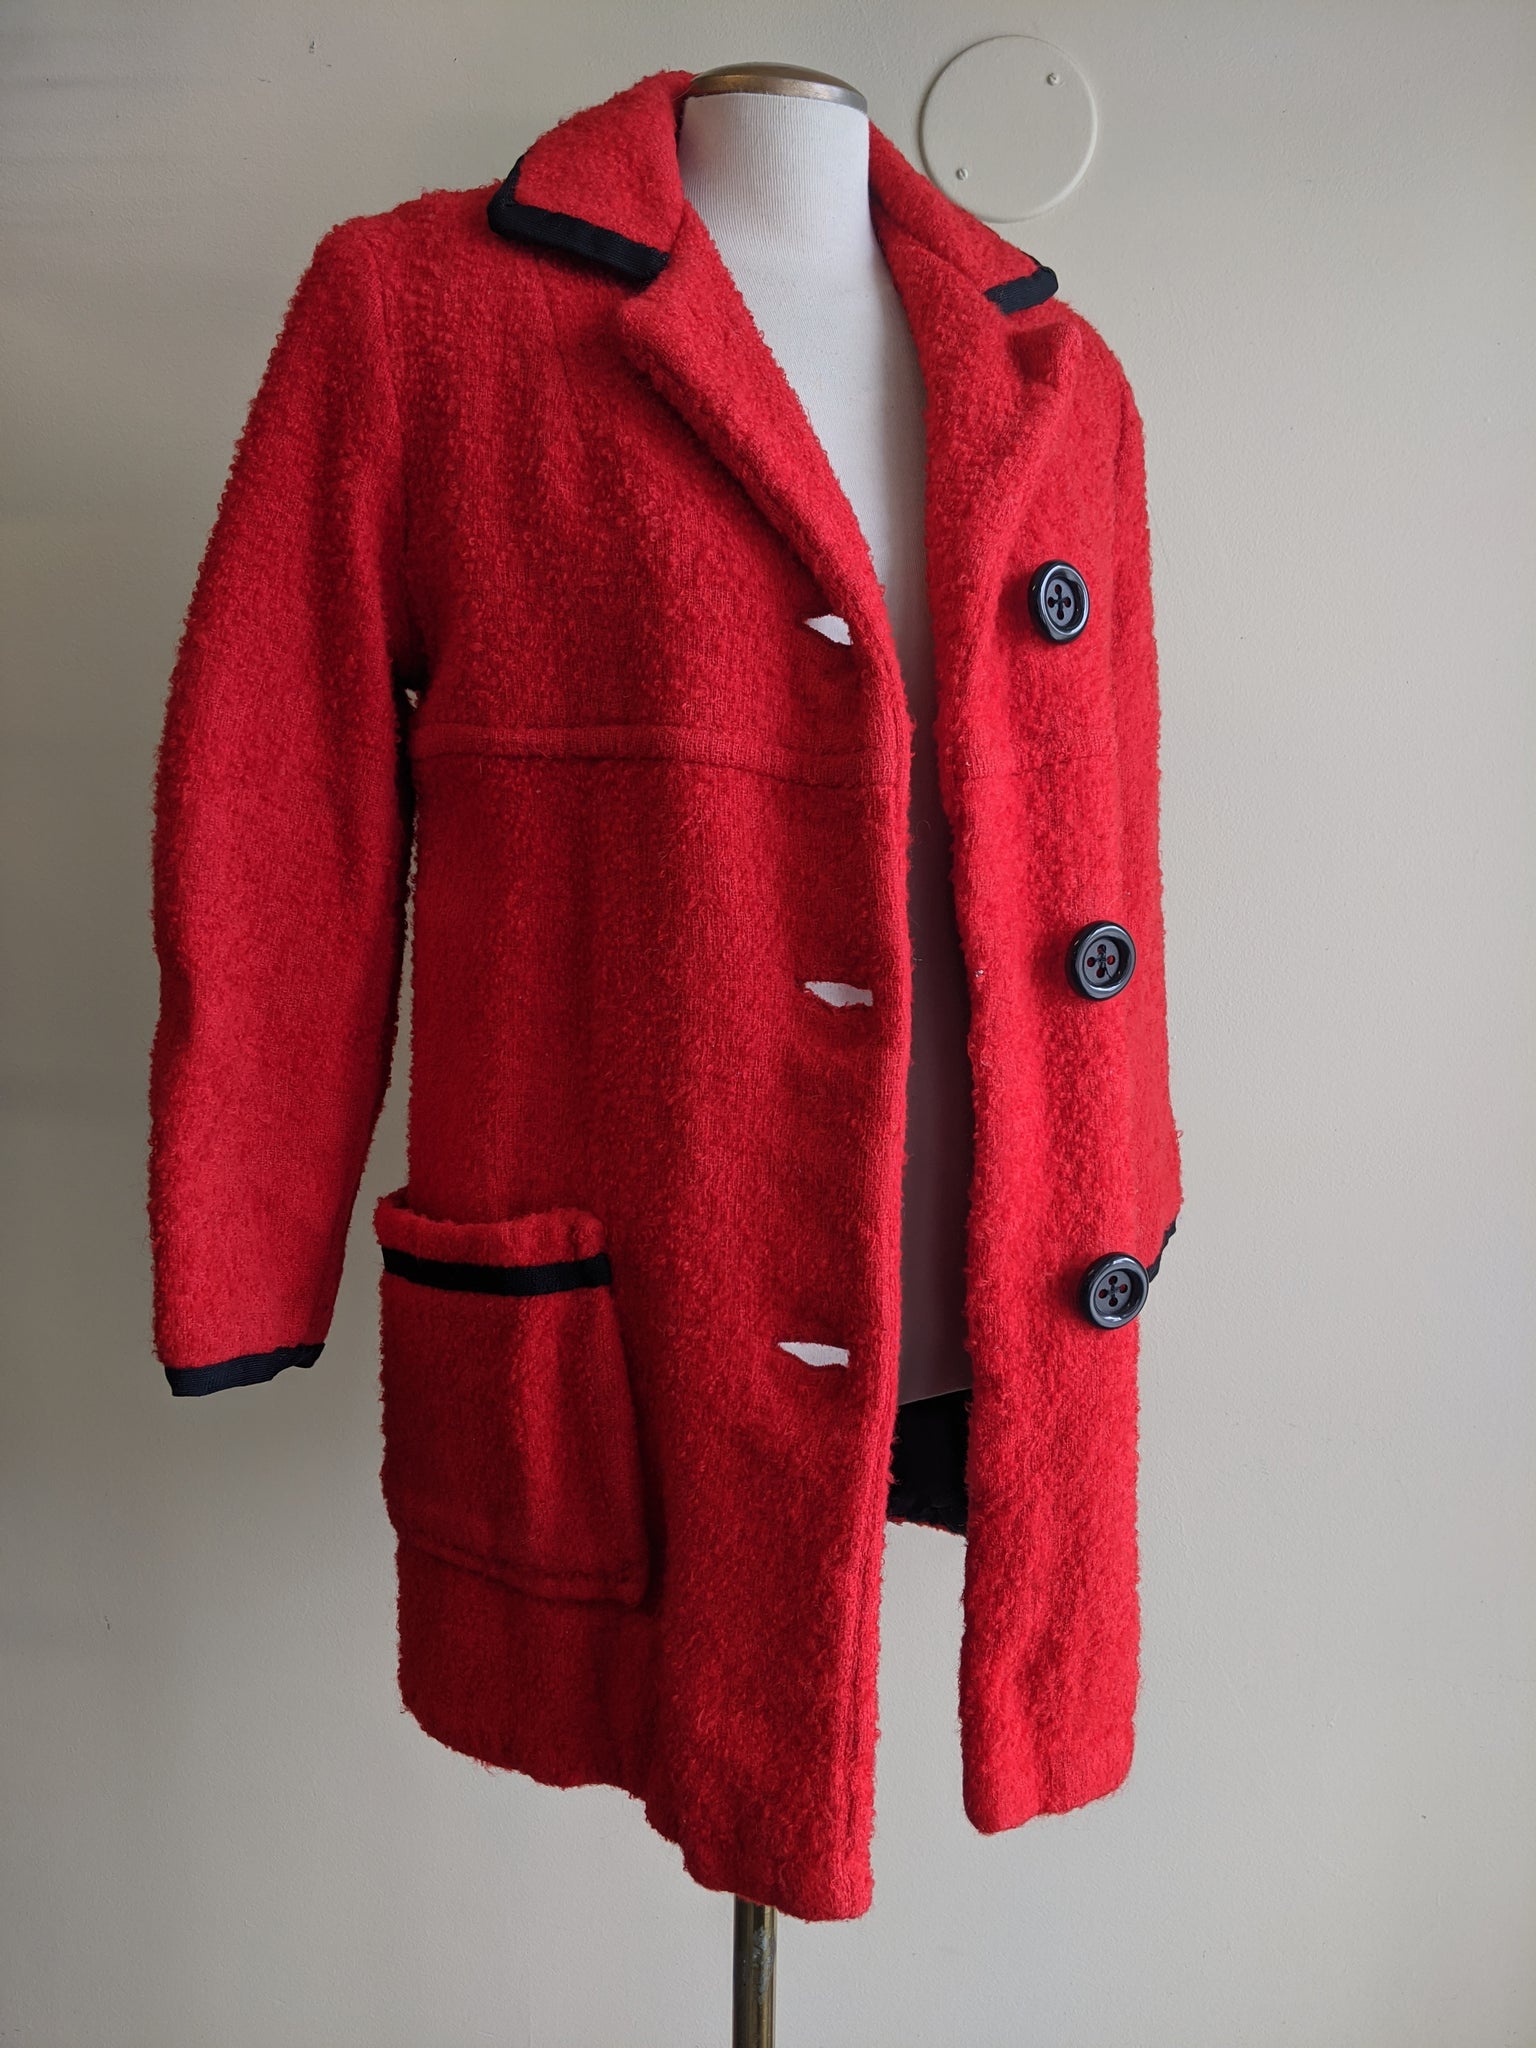 Charming Red Wool 1960’s Jacket